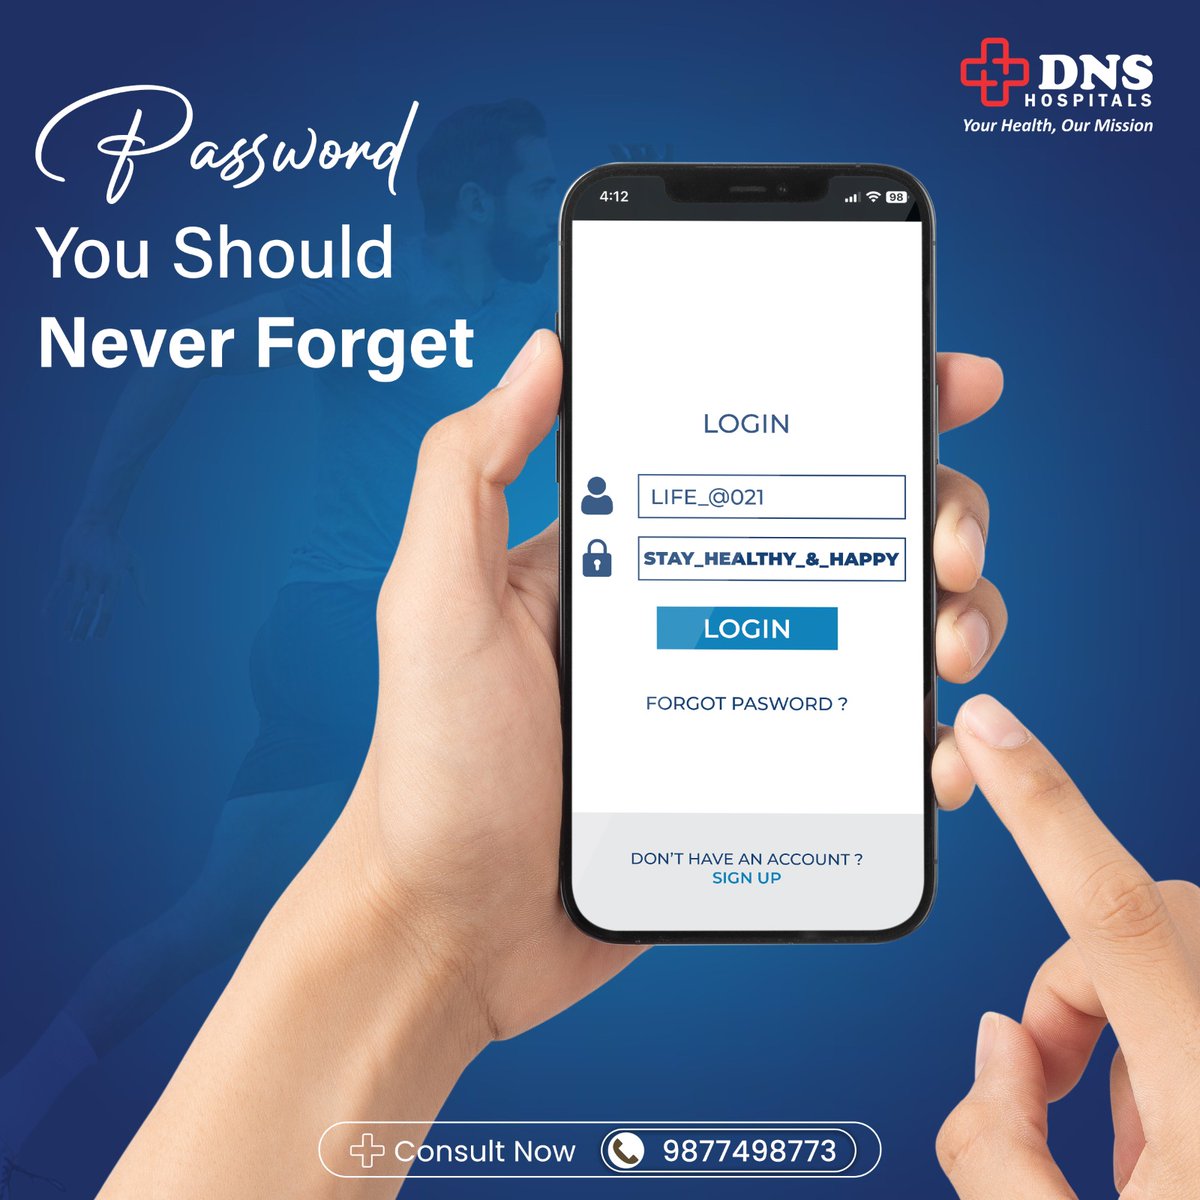 🔐 Which password should you never forget?

'Stay_Healthy_&_Happy'

Your well-being is the ultimate key to happiness! Keep it secure.
.

.
#DNS #dnshospitals #indore #multispecialisthospital
.
#stayhealthyandfit #StayHealthyStayHappy #Password #healthpassword #dnshospitals